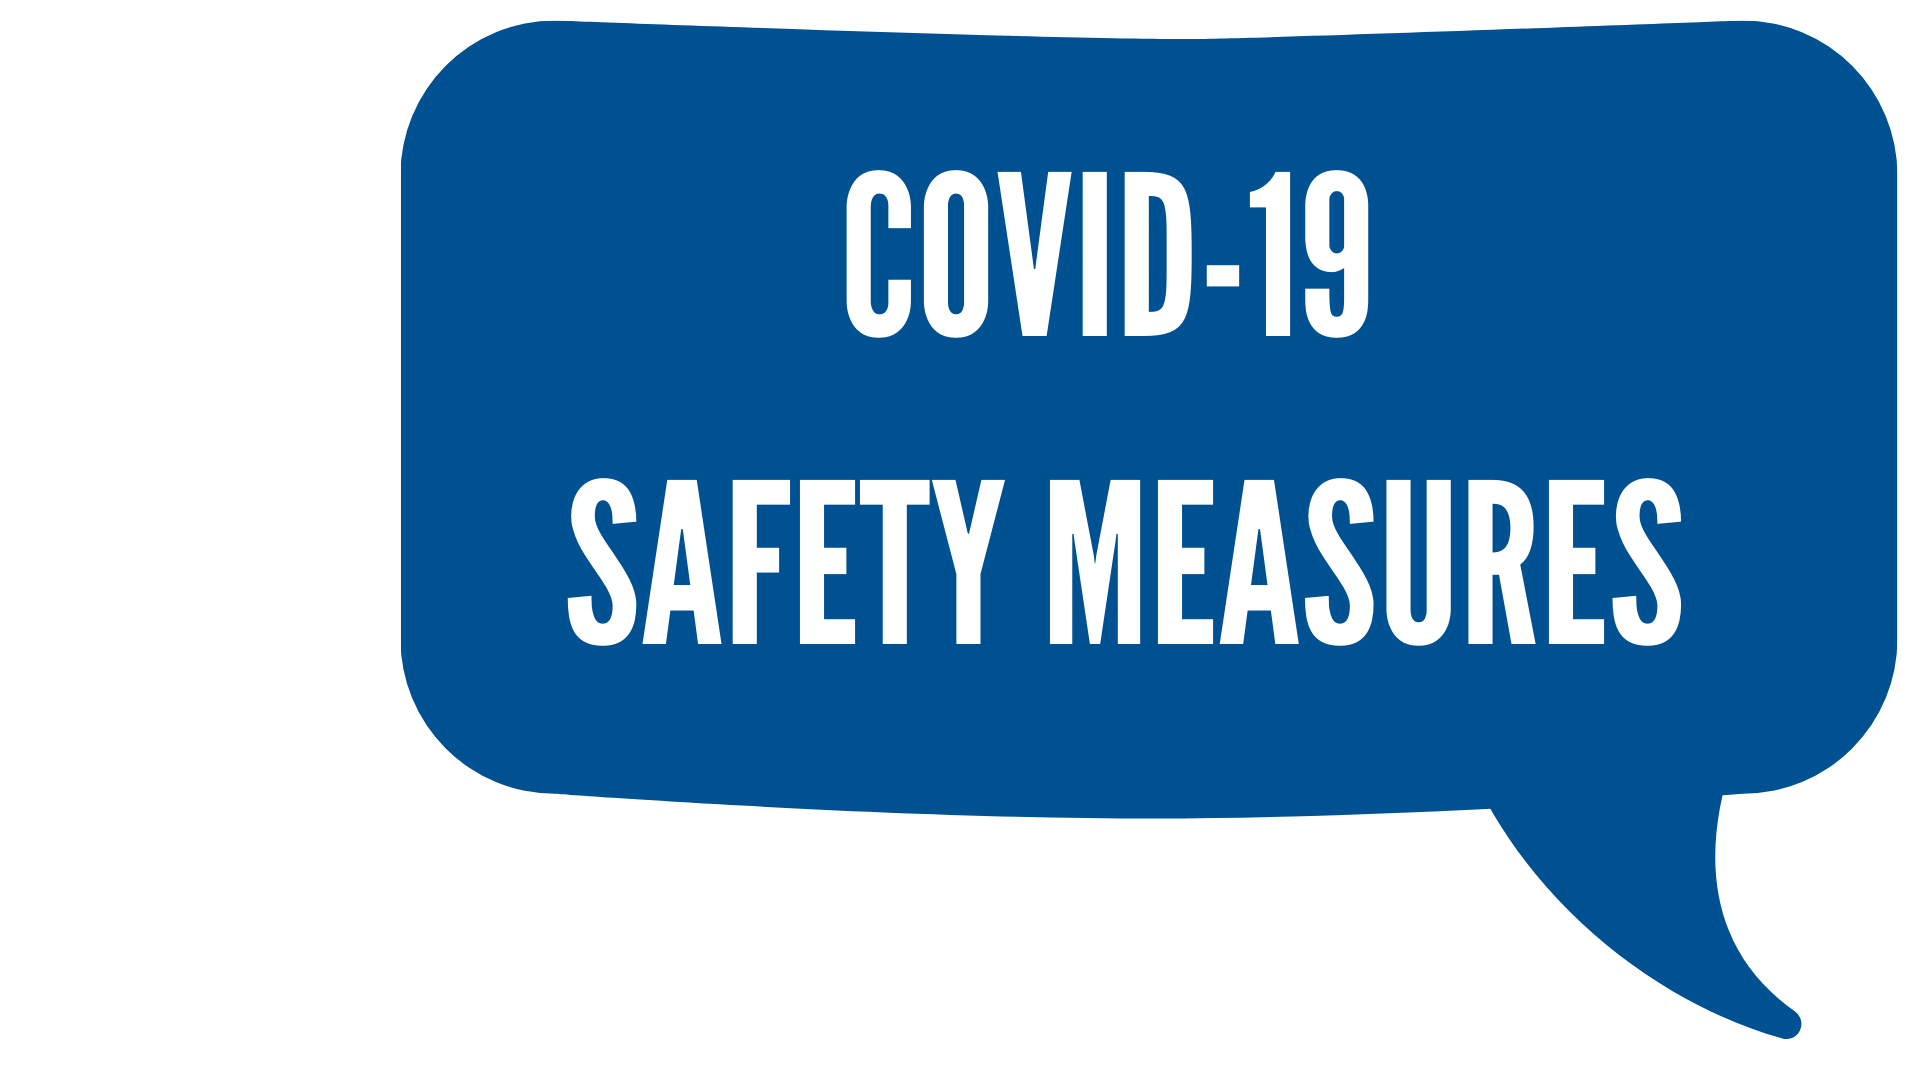 COVID-10 SAFETY